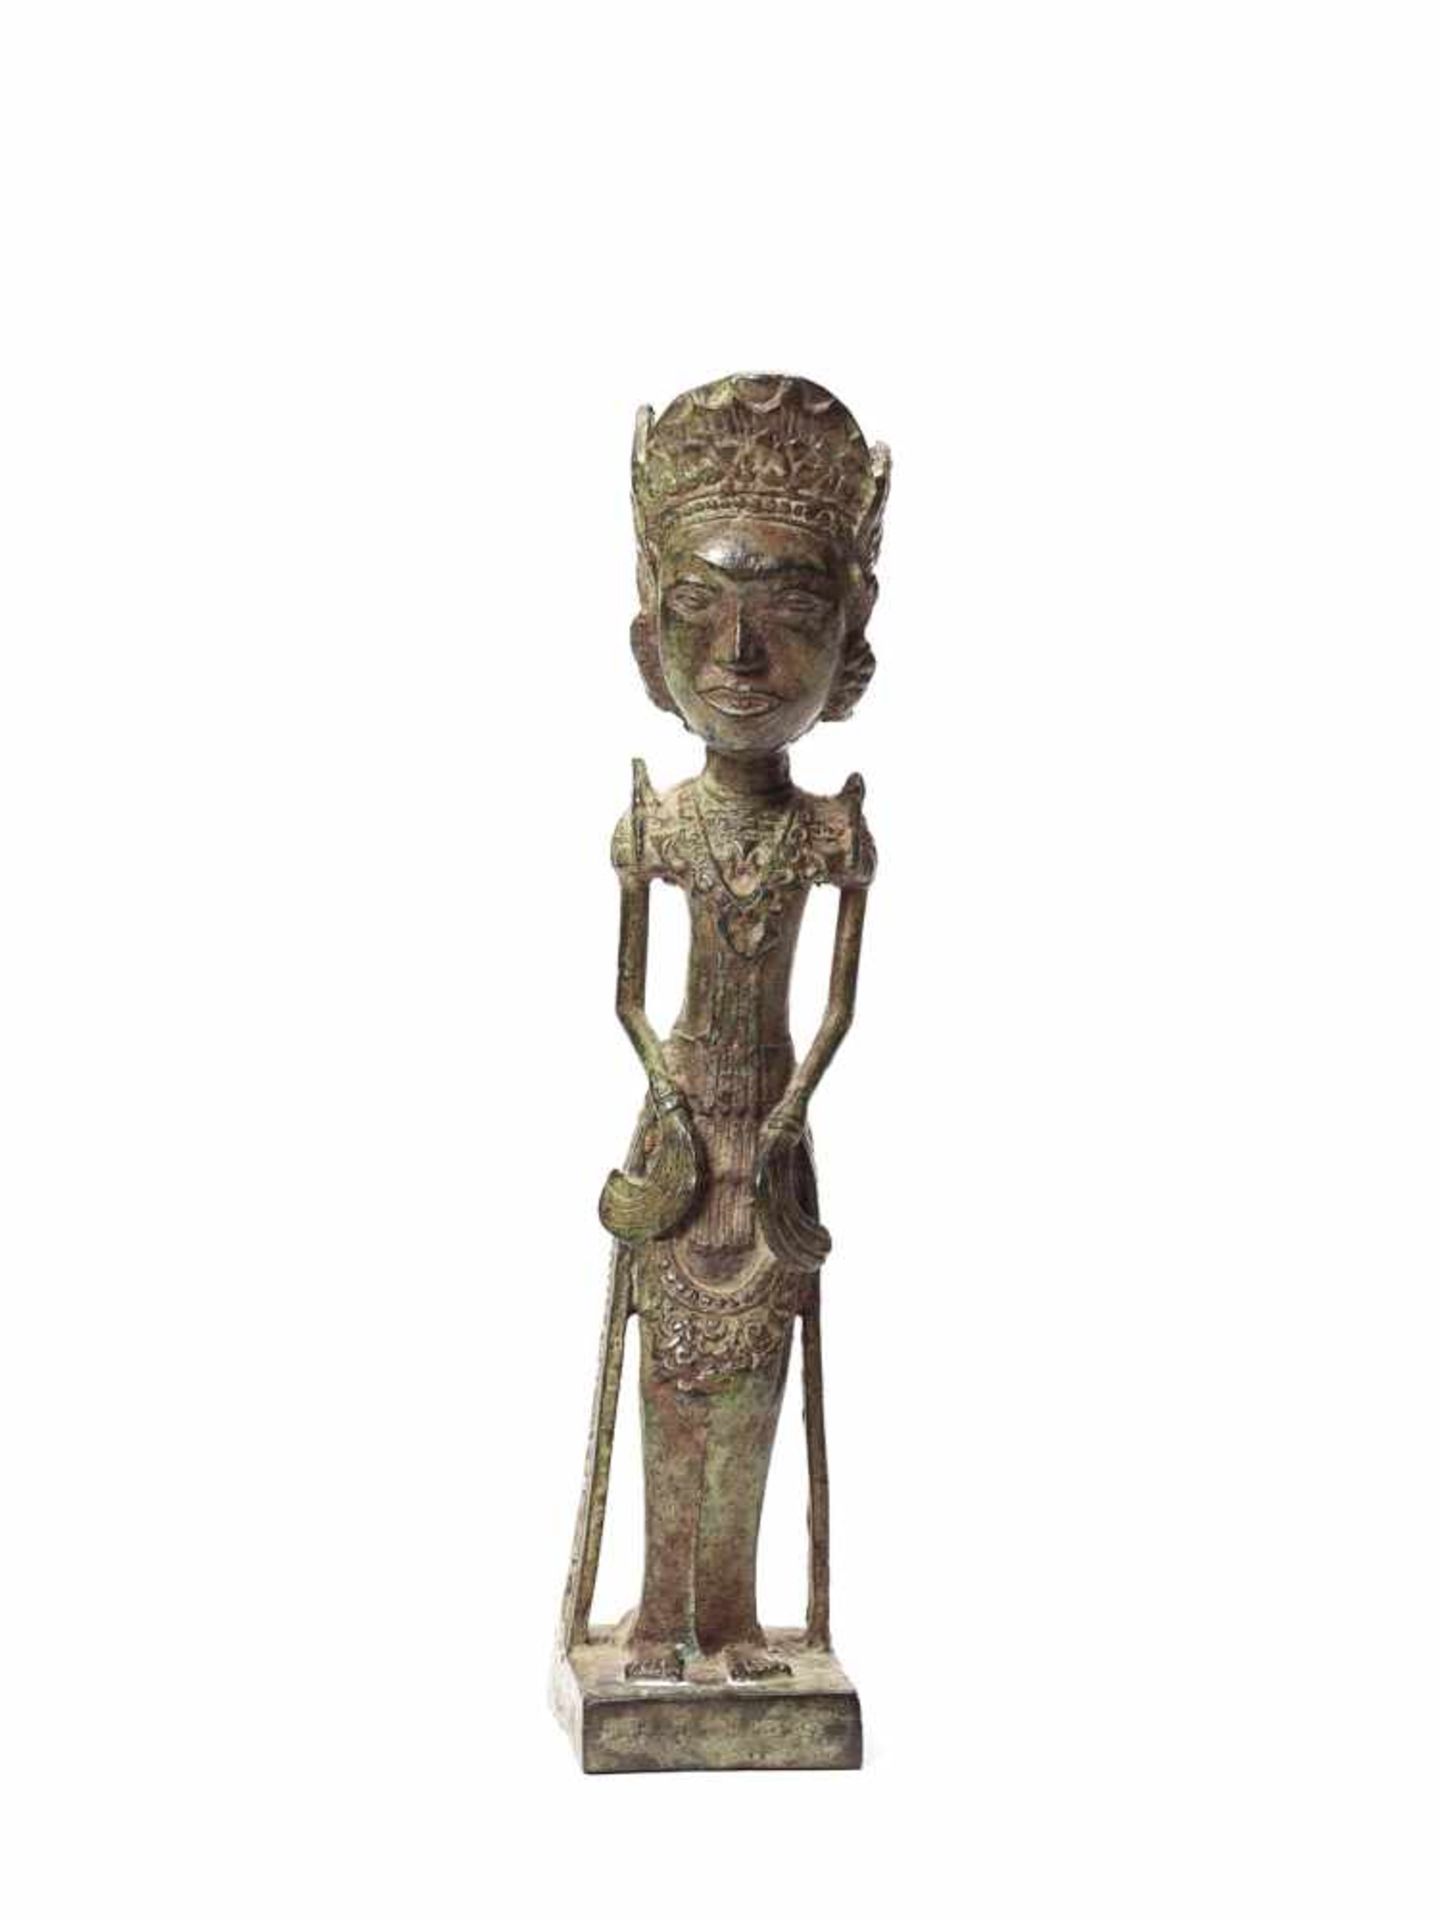 AN UNUSUAL THAI BRONZE FIGURE OF A PRINCESS OR NOBLE WOMAN, EARLY 1900s - Bild 2 aus 4